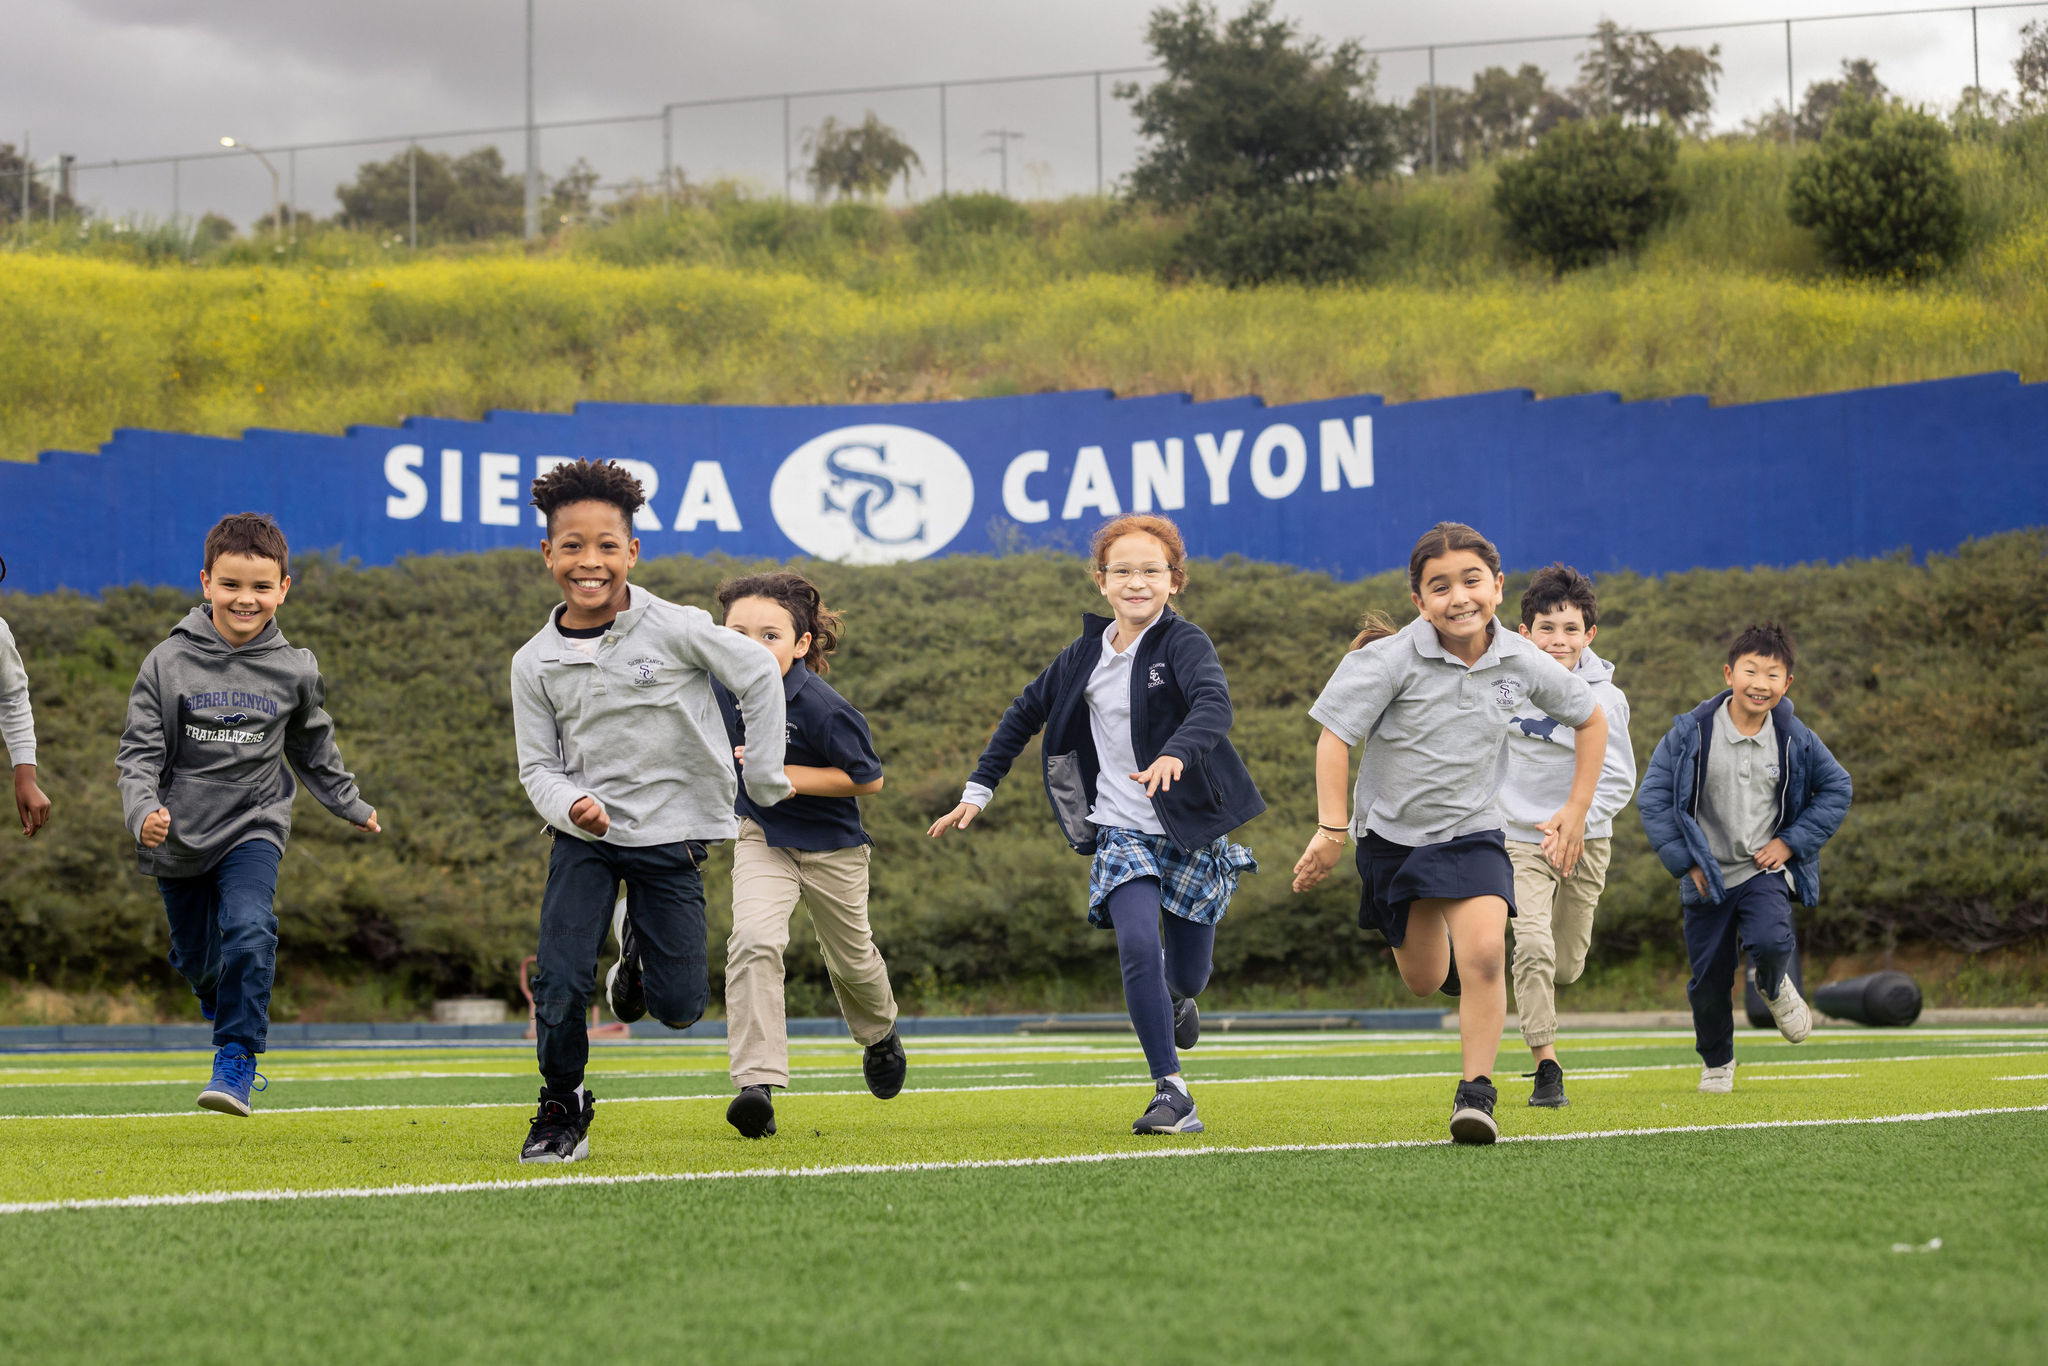 A group of kids running on a field with a sign that says Sierra Canyon. Support the school annual fund!